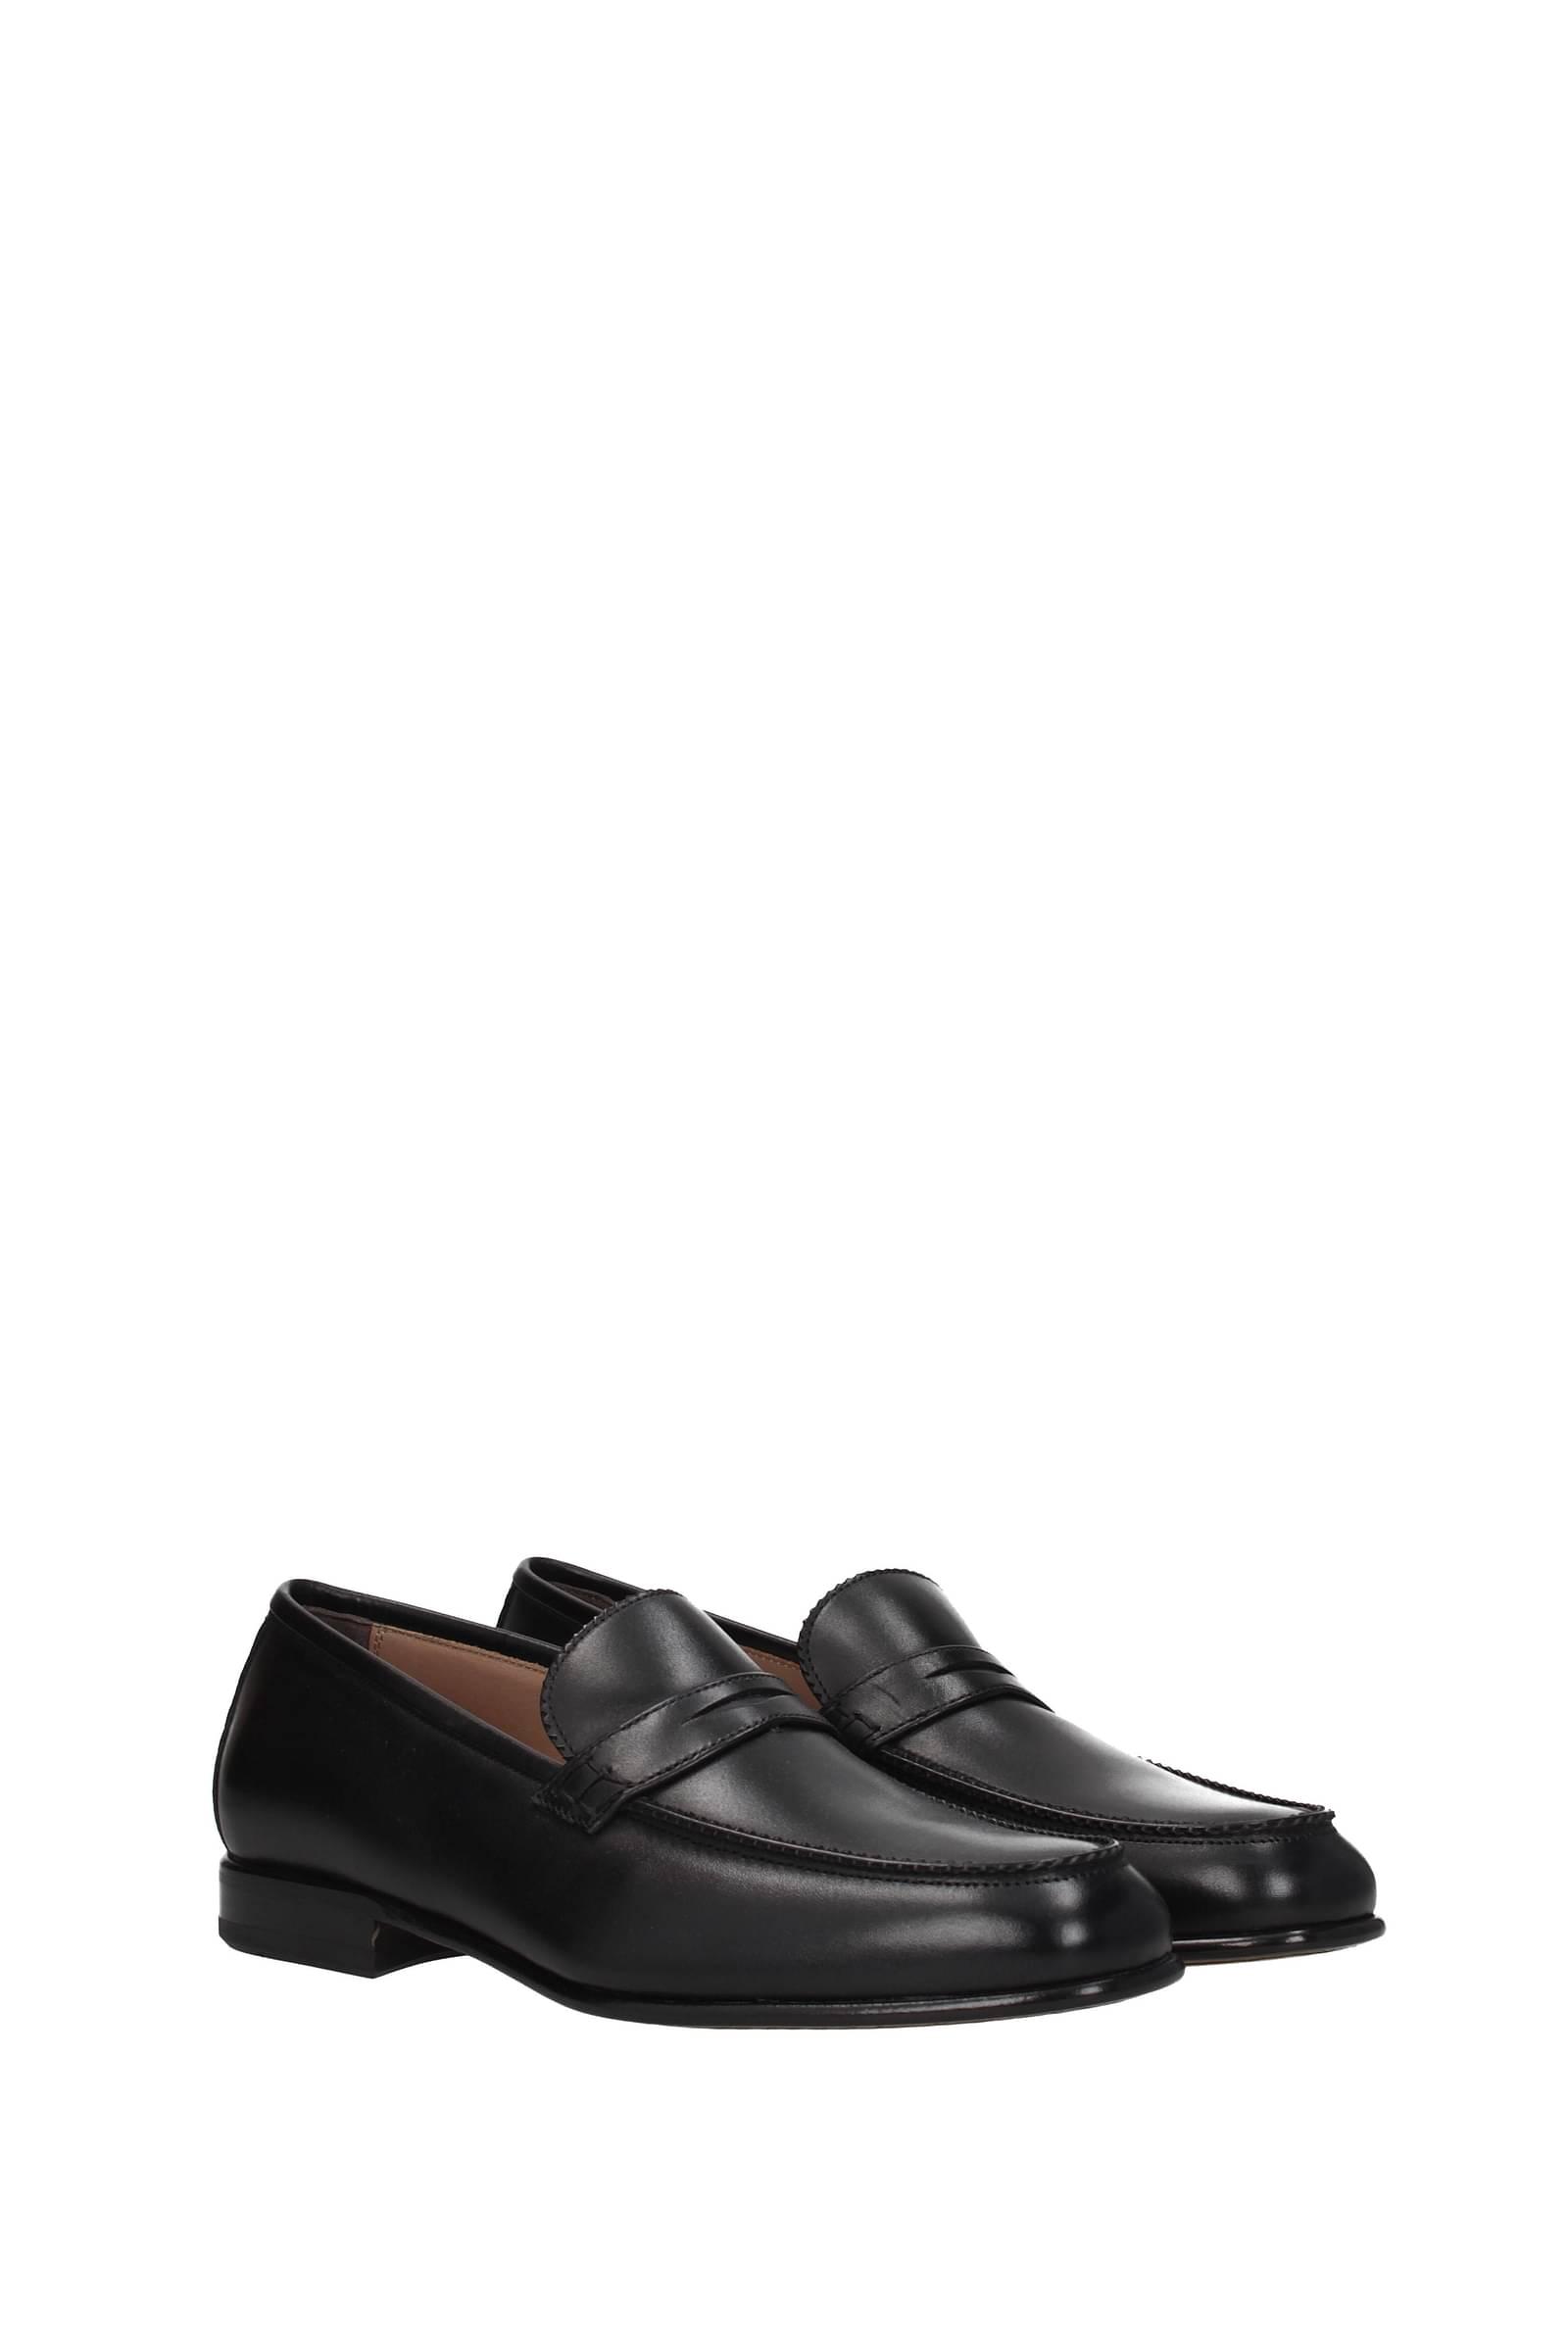 Ferragamo Loafers Lord Leather in Black for Men